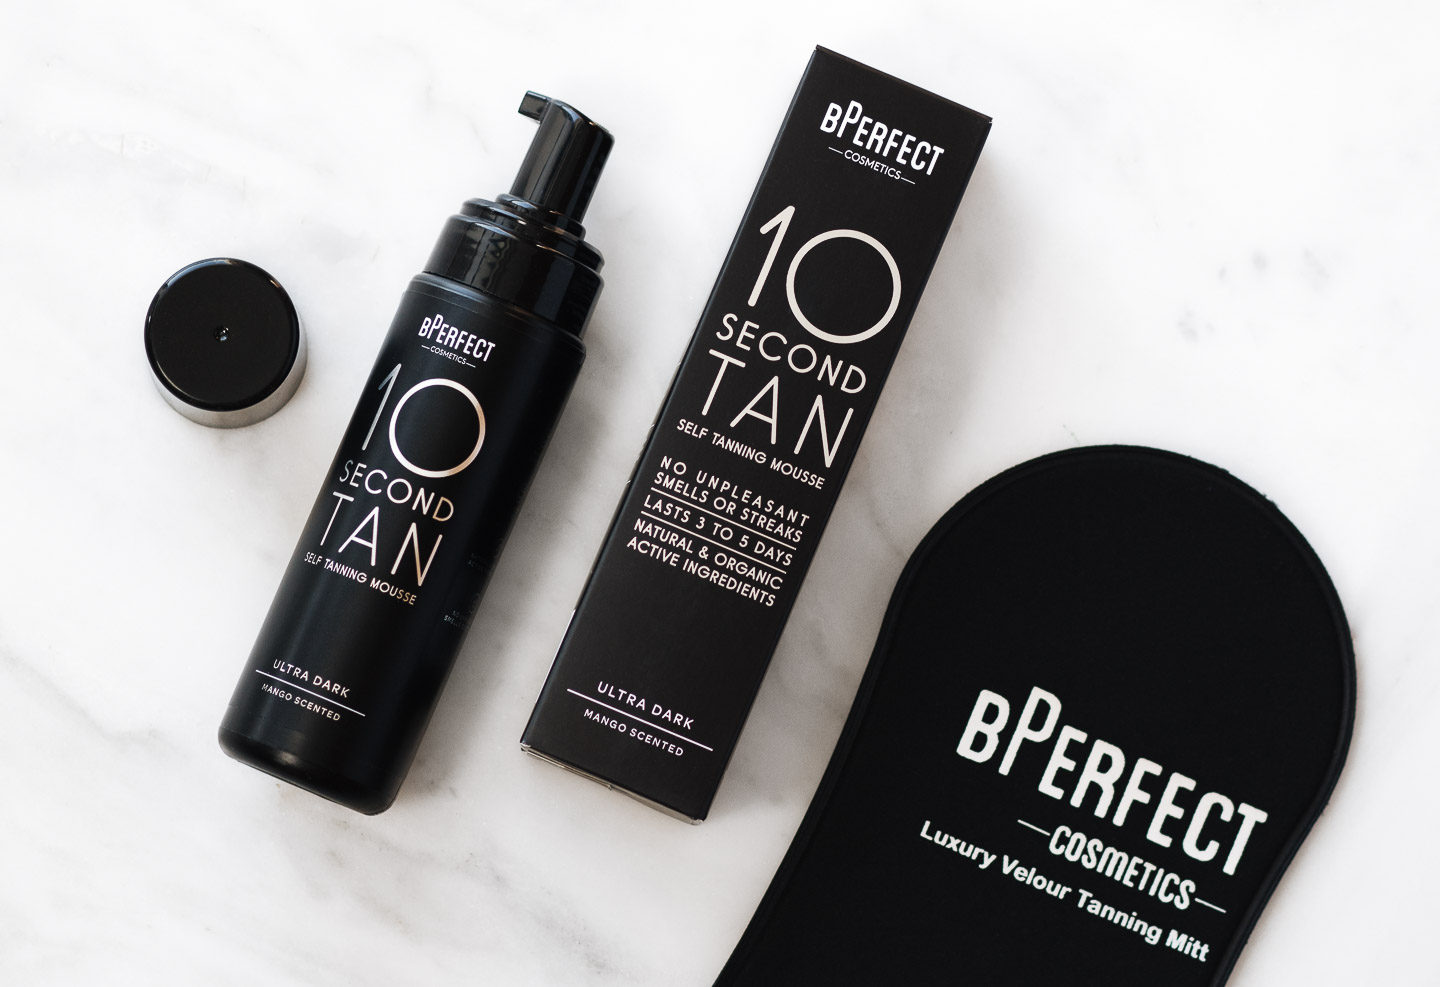 B PERFECT 10 SECOND TAN ULTRA DARK MOUSSE – REVIEW